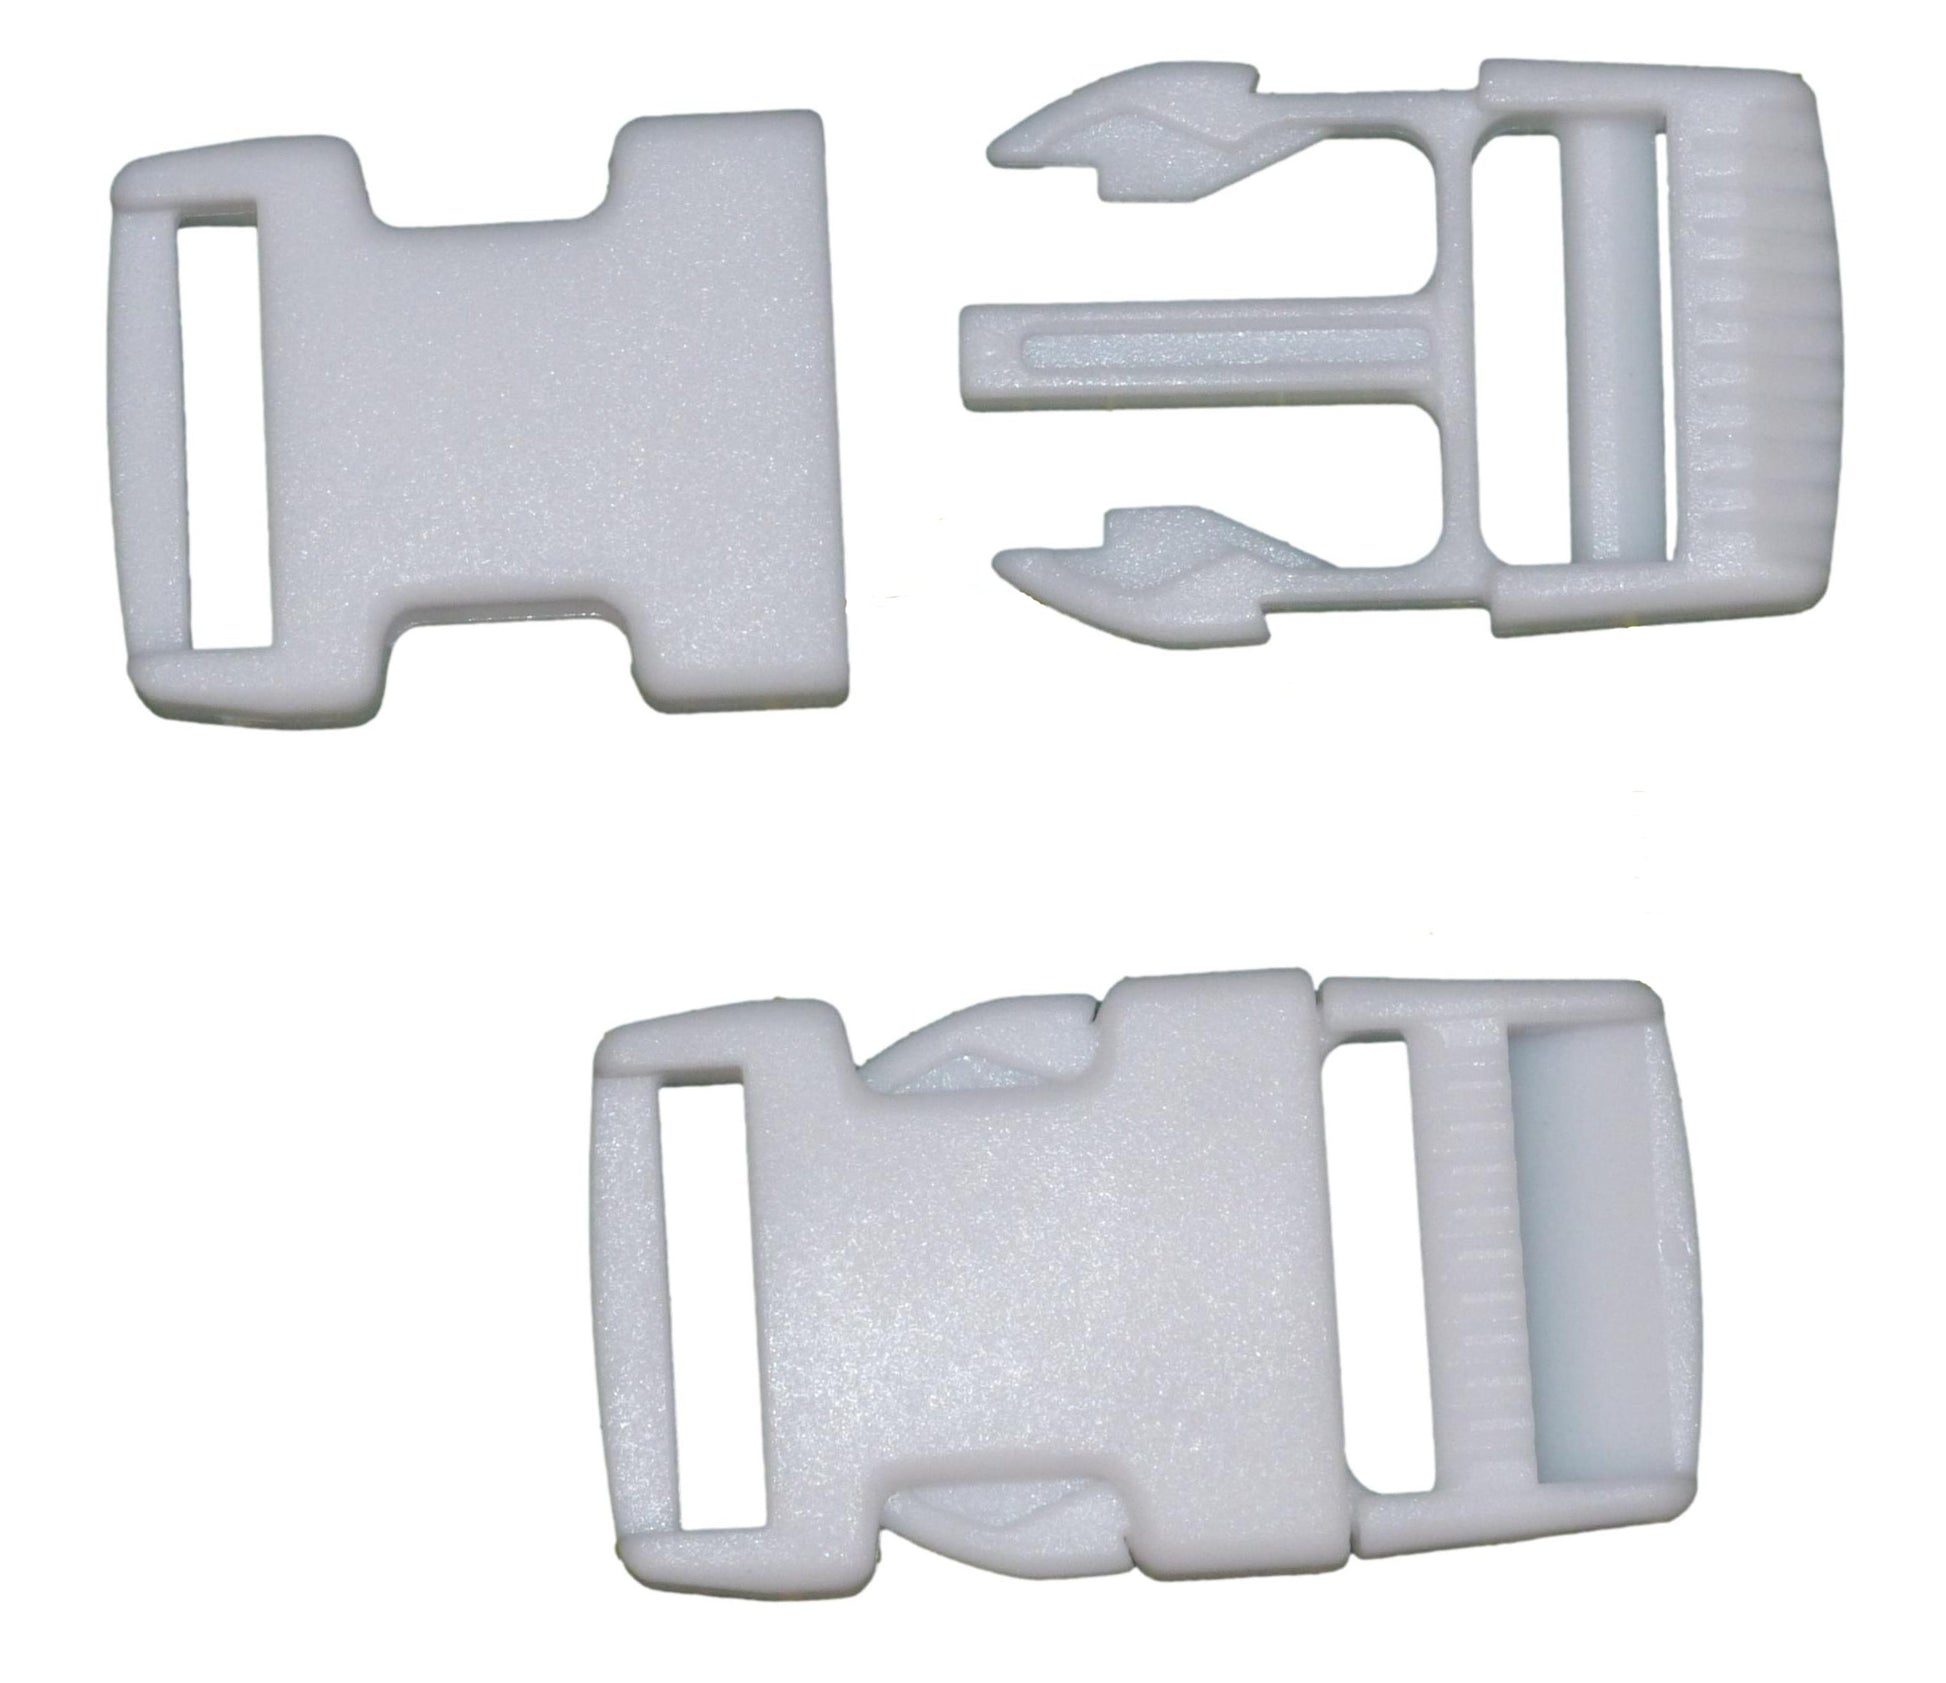 25mm plastic quick release buckle in white